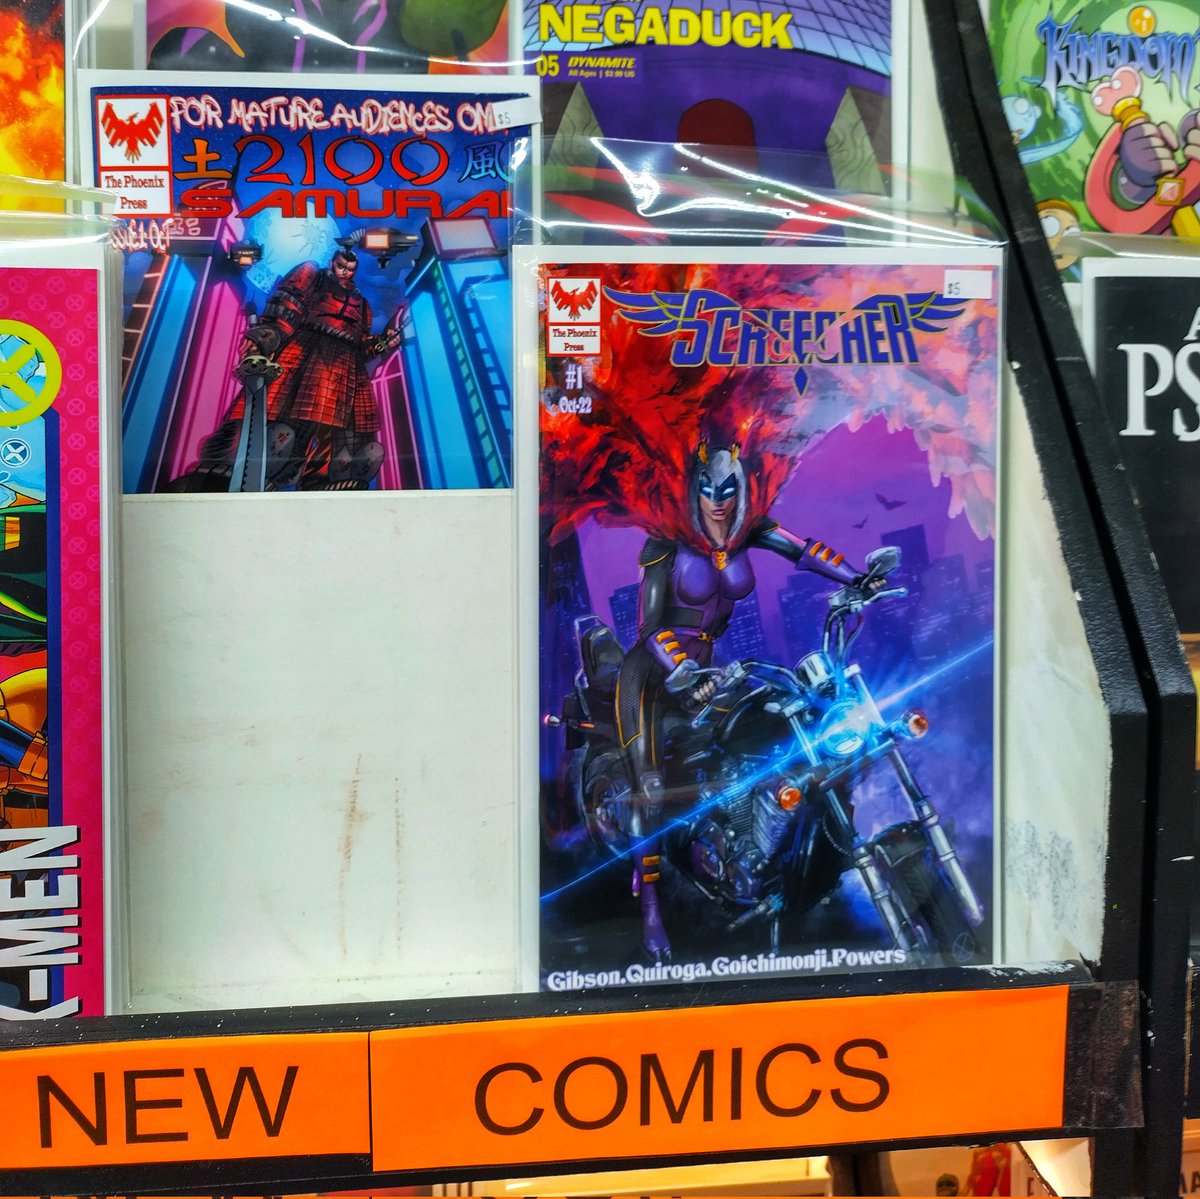 9 Planet Comics just restocked some issues of my comic! 
If you are near Dearborn Heights, MI be sure to stop in!
#ironage